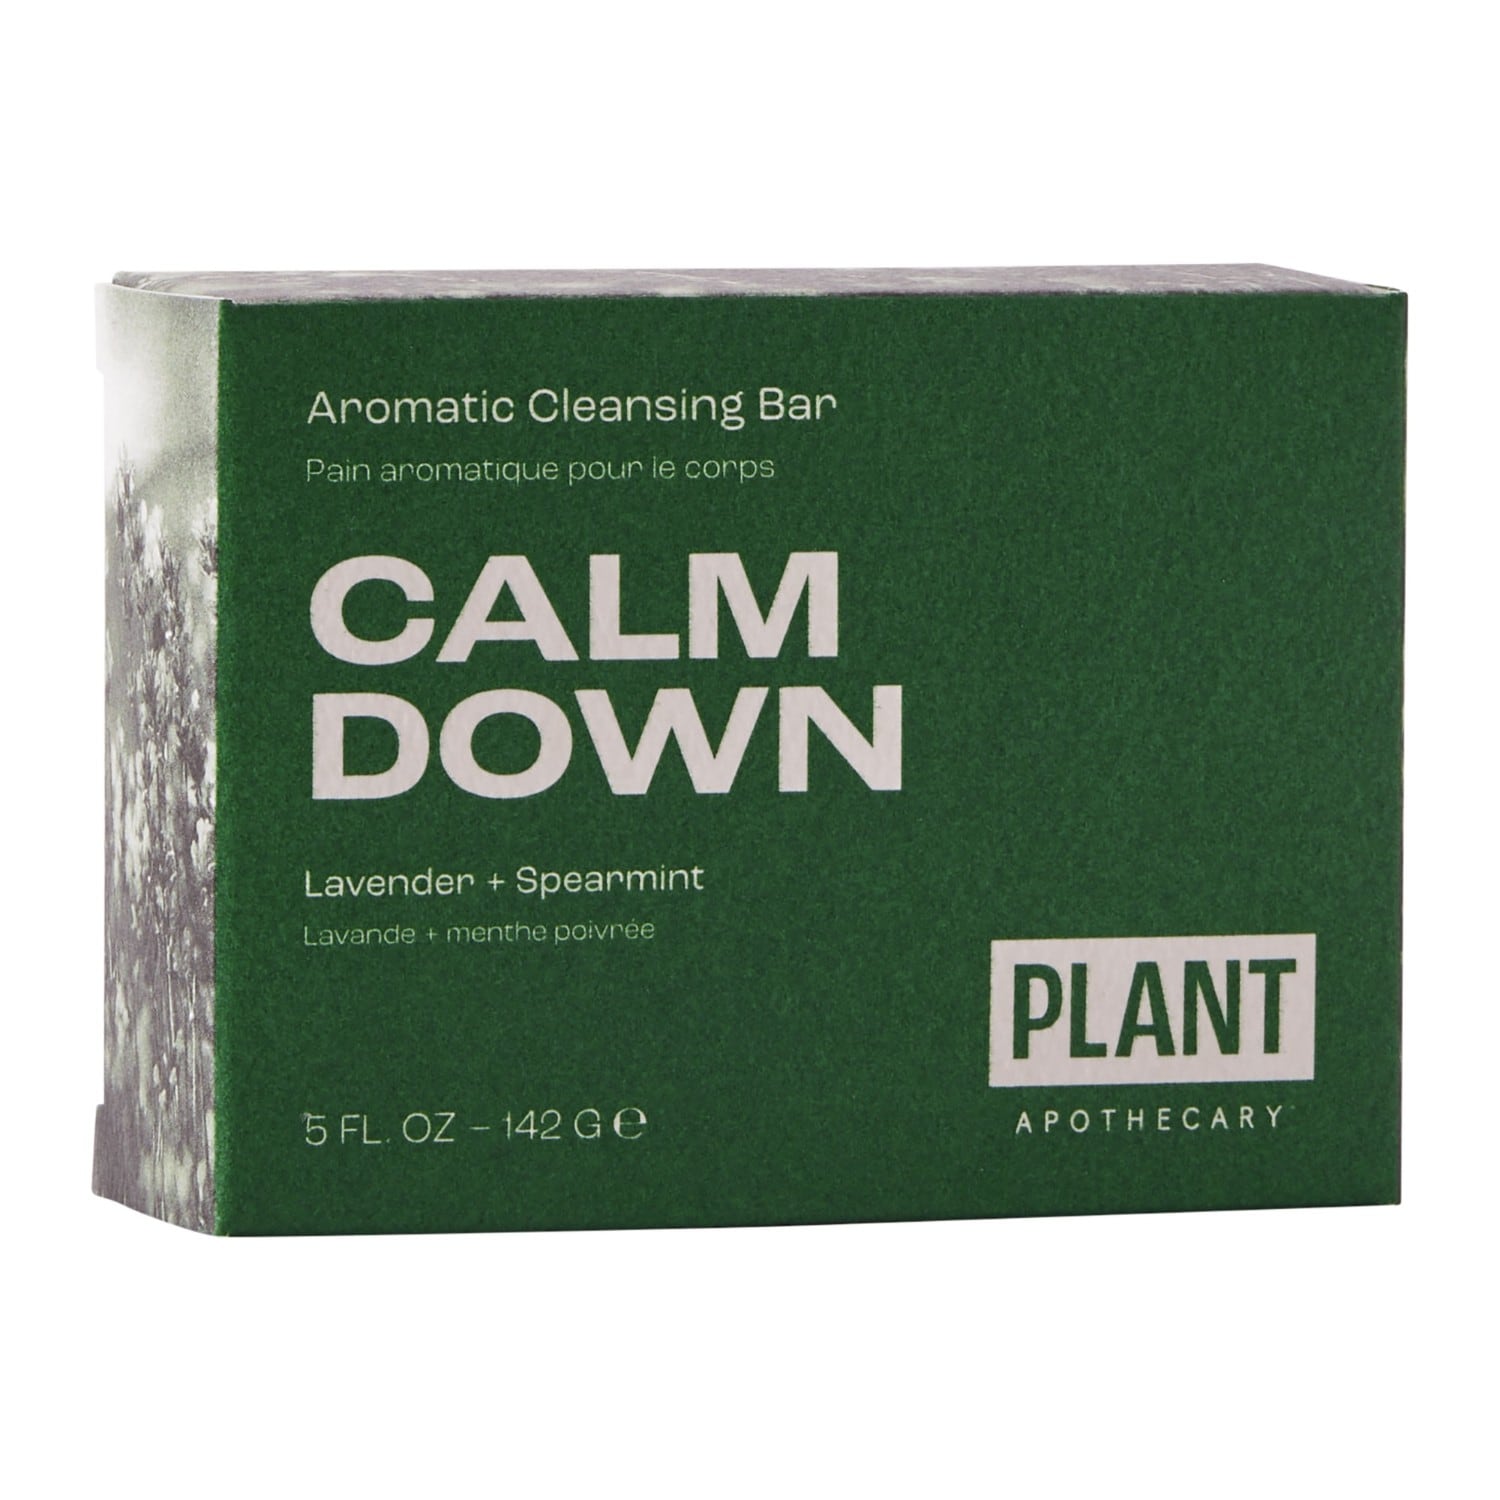 Plant Apothecary Calm Down Aromatic Body Cleansing Bar